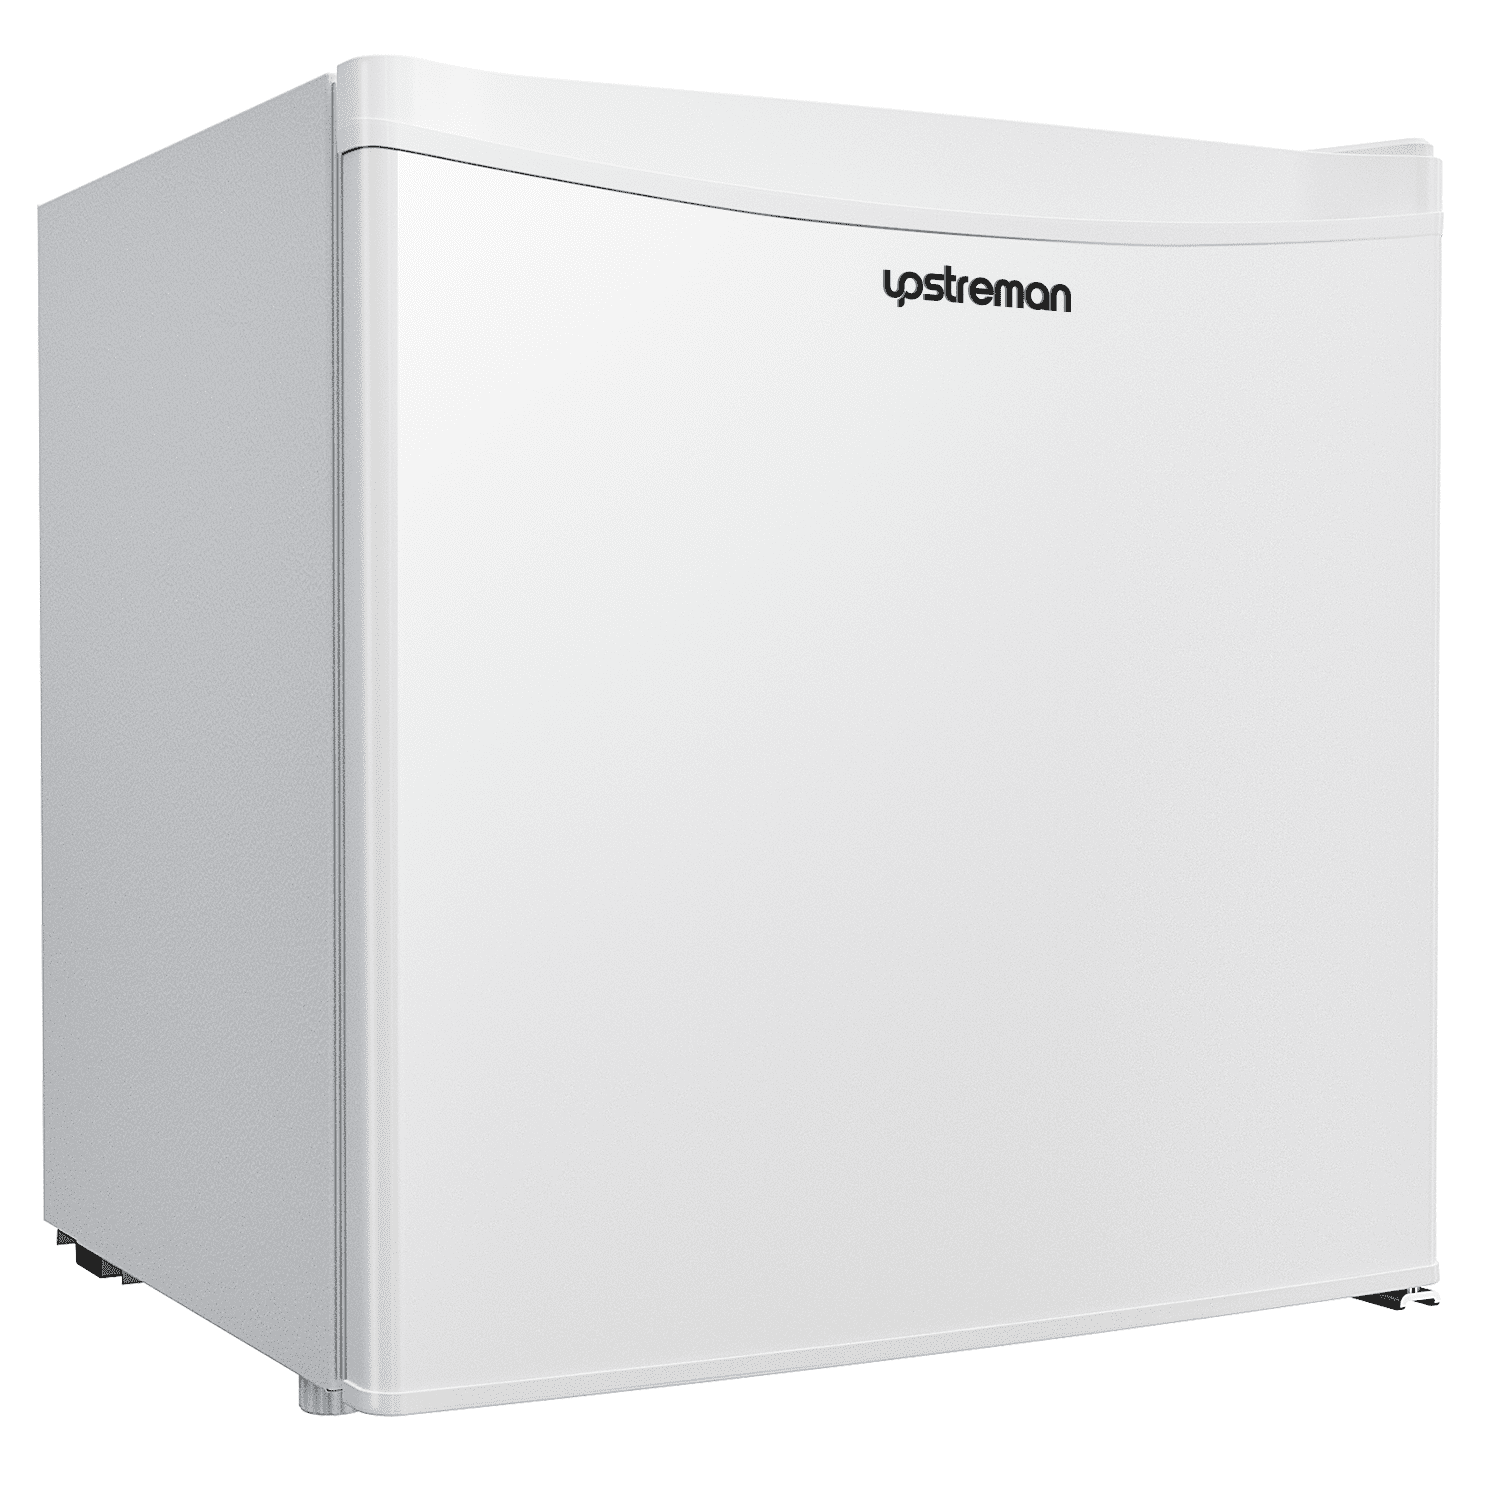 Summit CP34BSS 19 Inch Top Freezer Refrigerator with 3.2 cu. ft